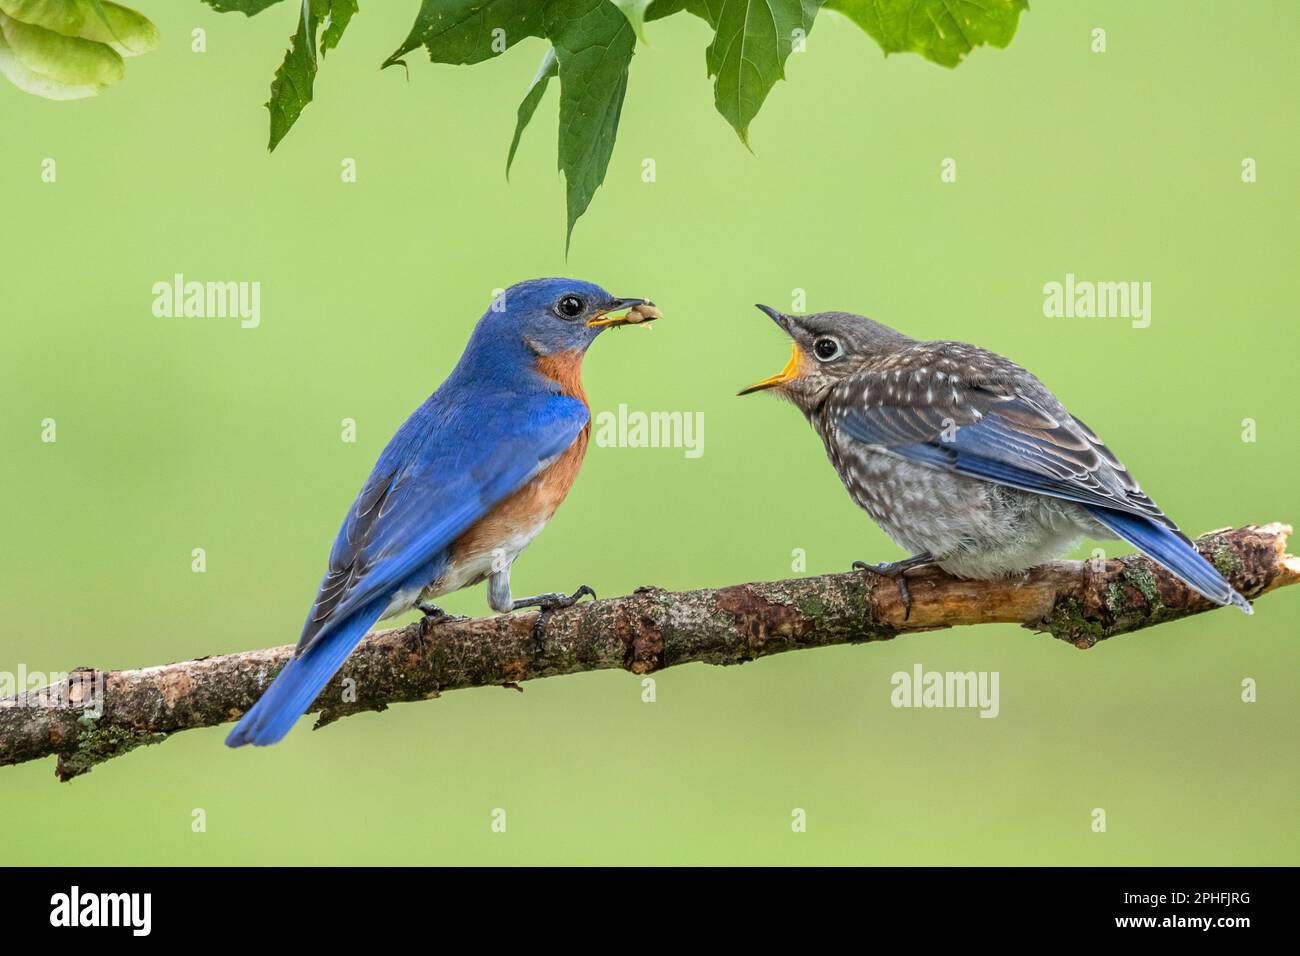 A male Eastern Bluebird feeds one of his hungry fledgling chicks with birdseed while perched on a branch with green leaves at the top of the frame. Stock Photo